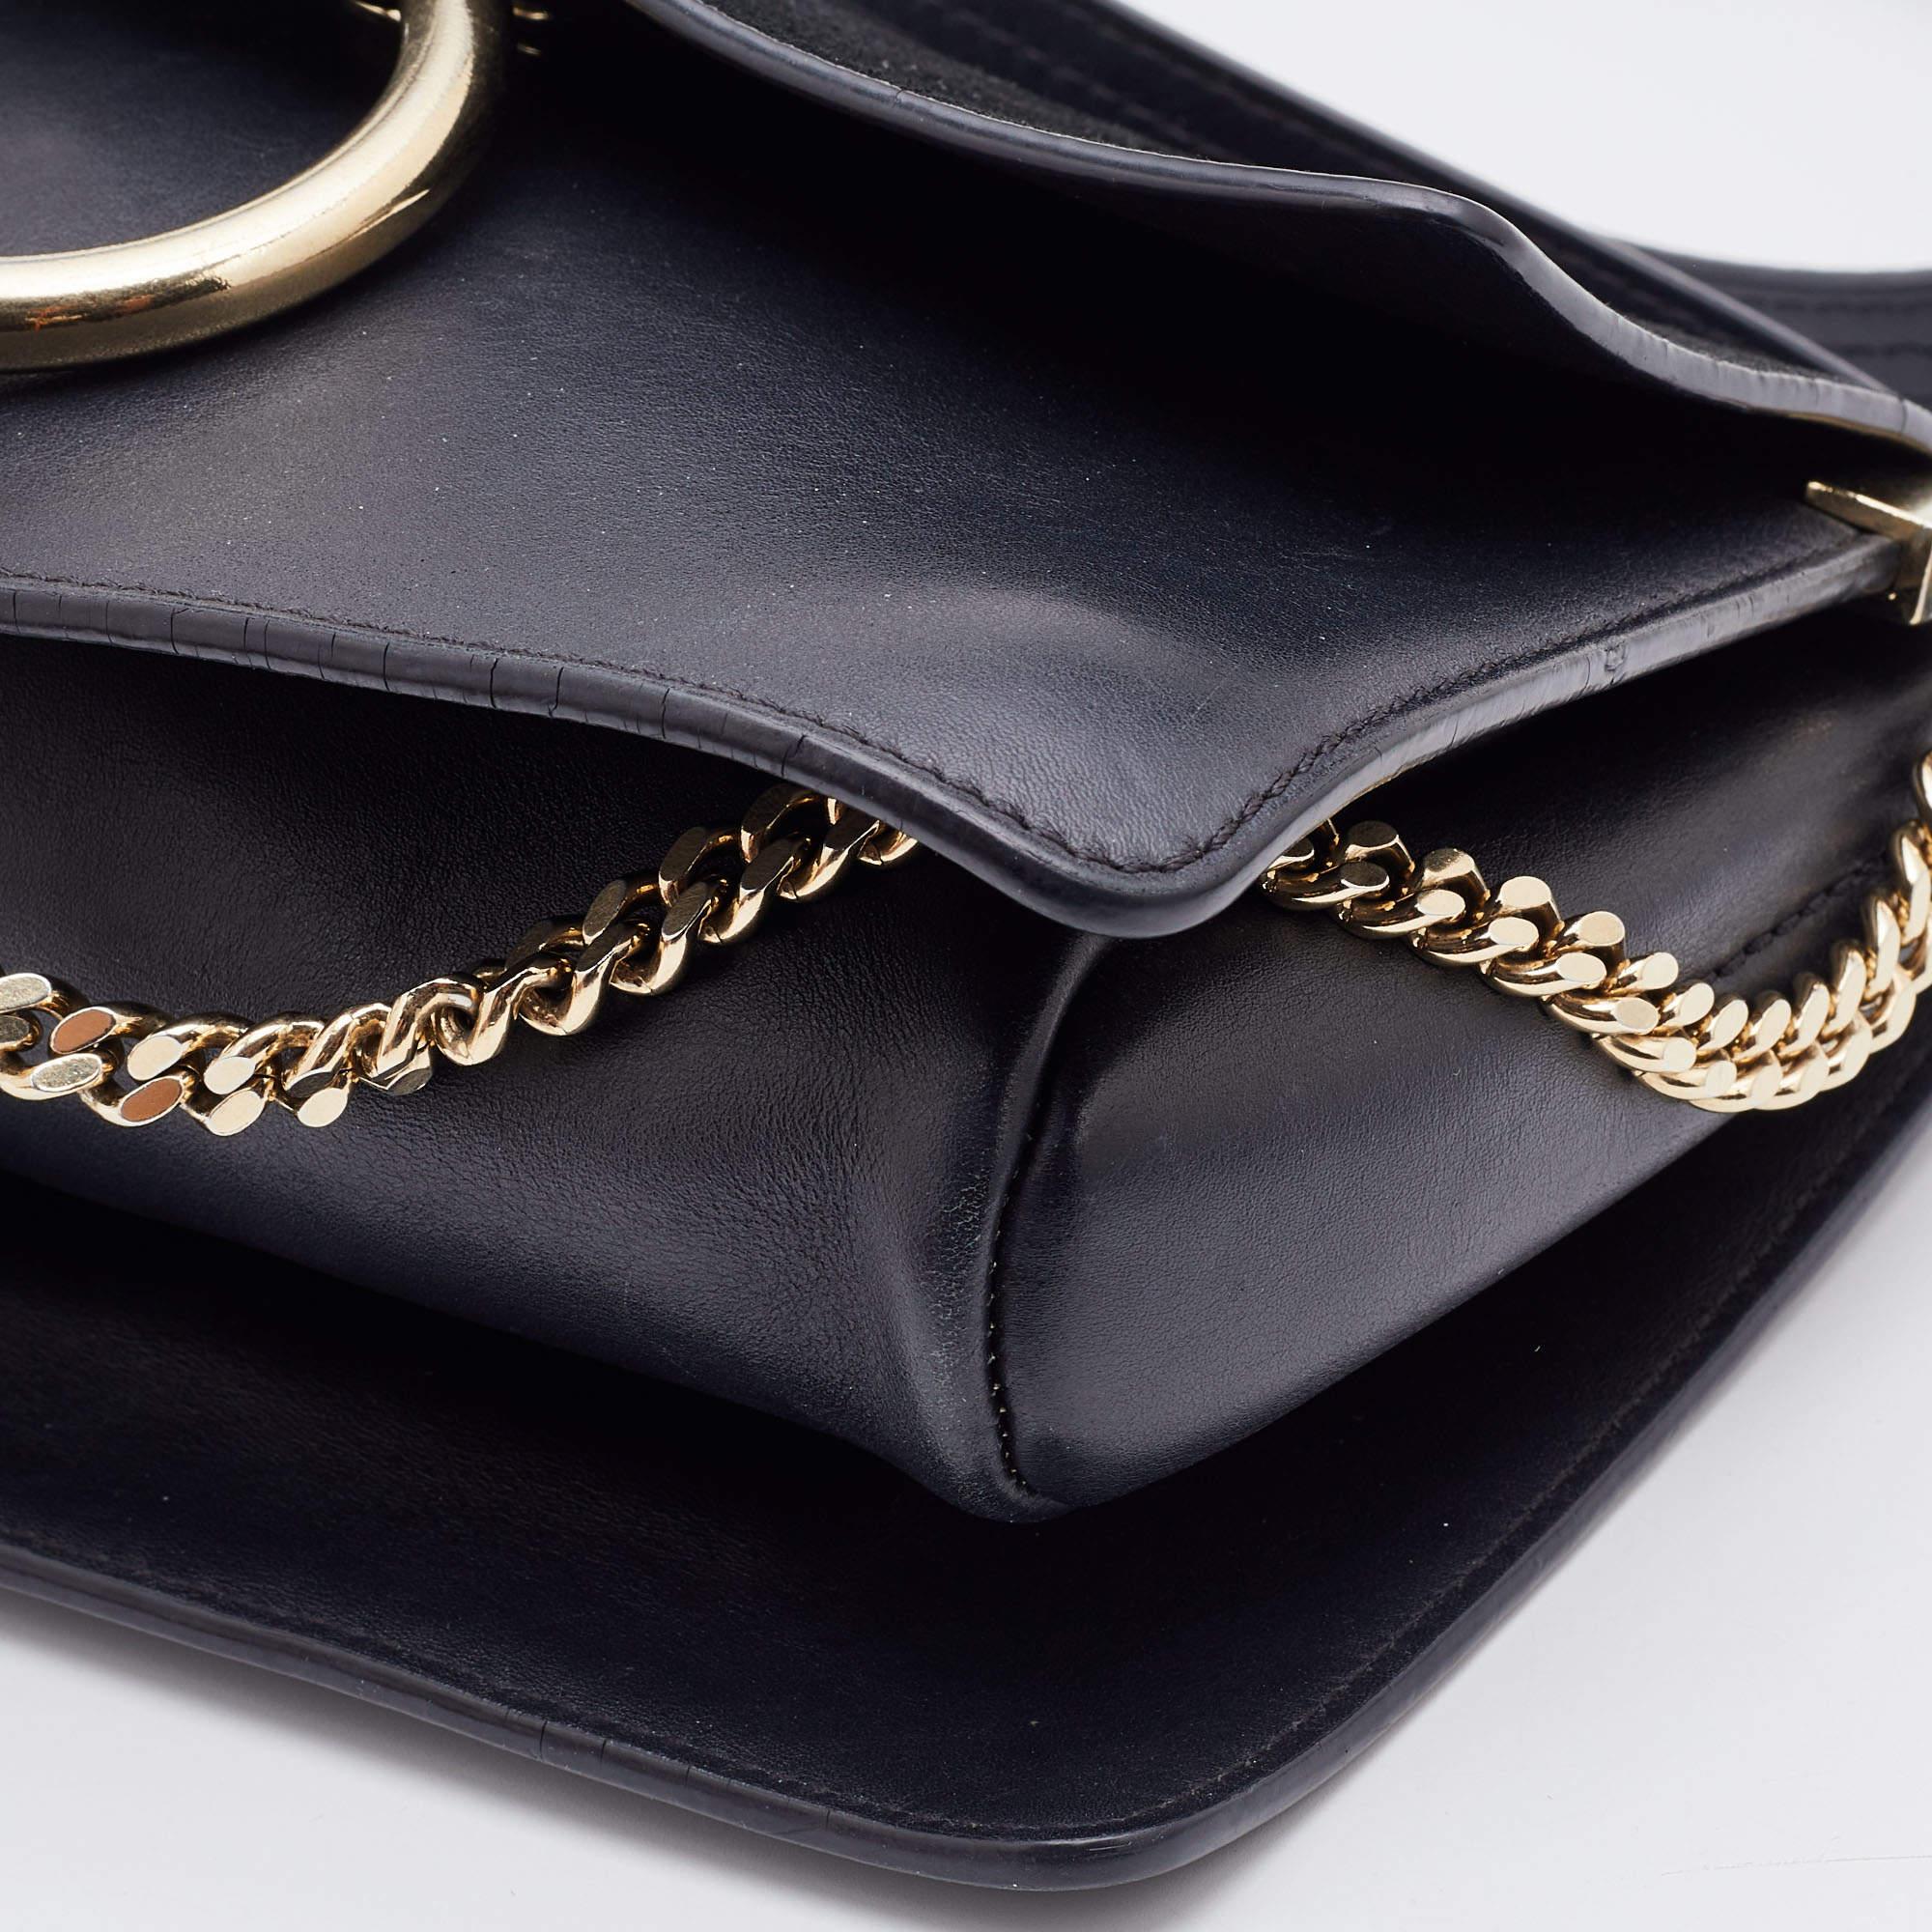 Chloe Black Leather and Suede Small Faye Shoulder Bag 2